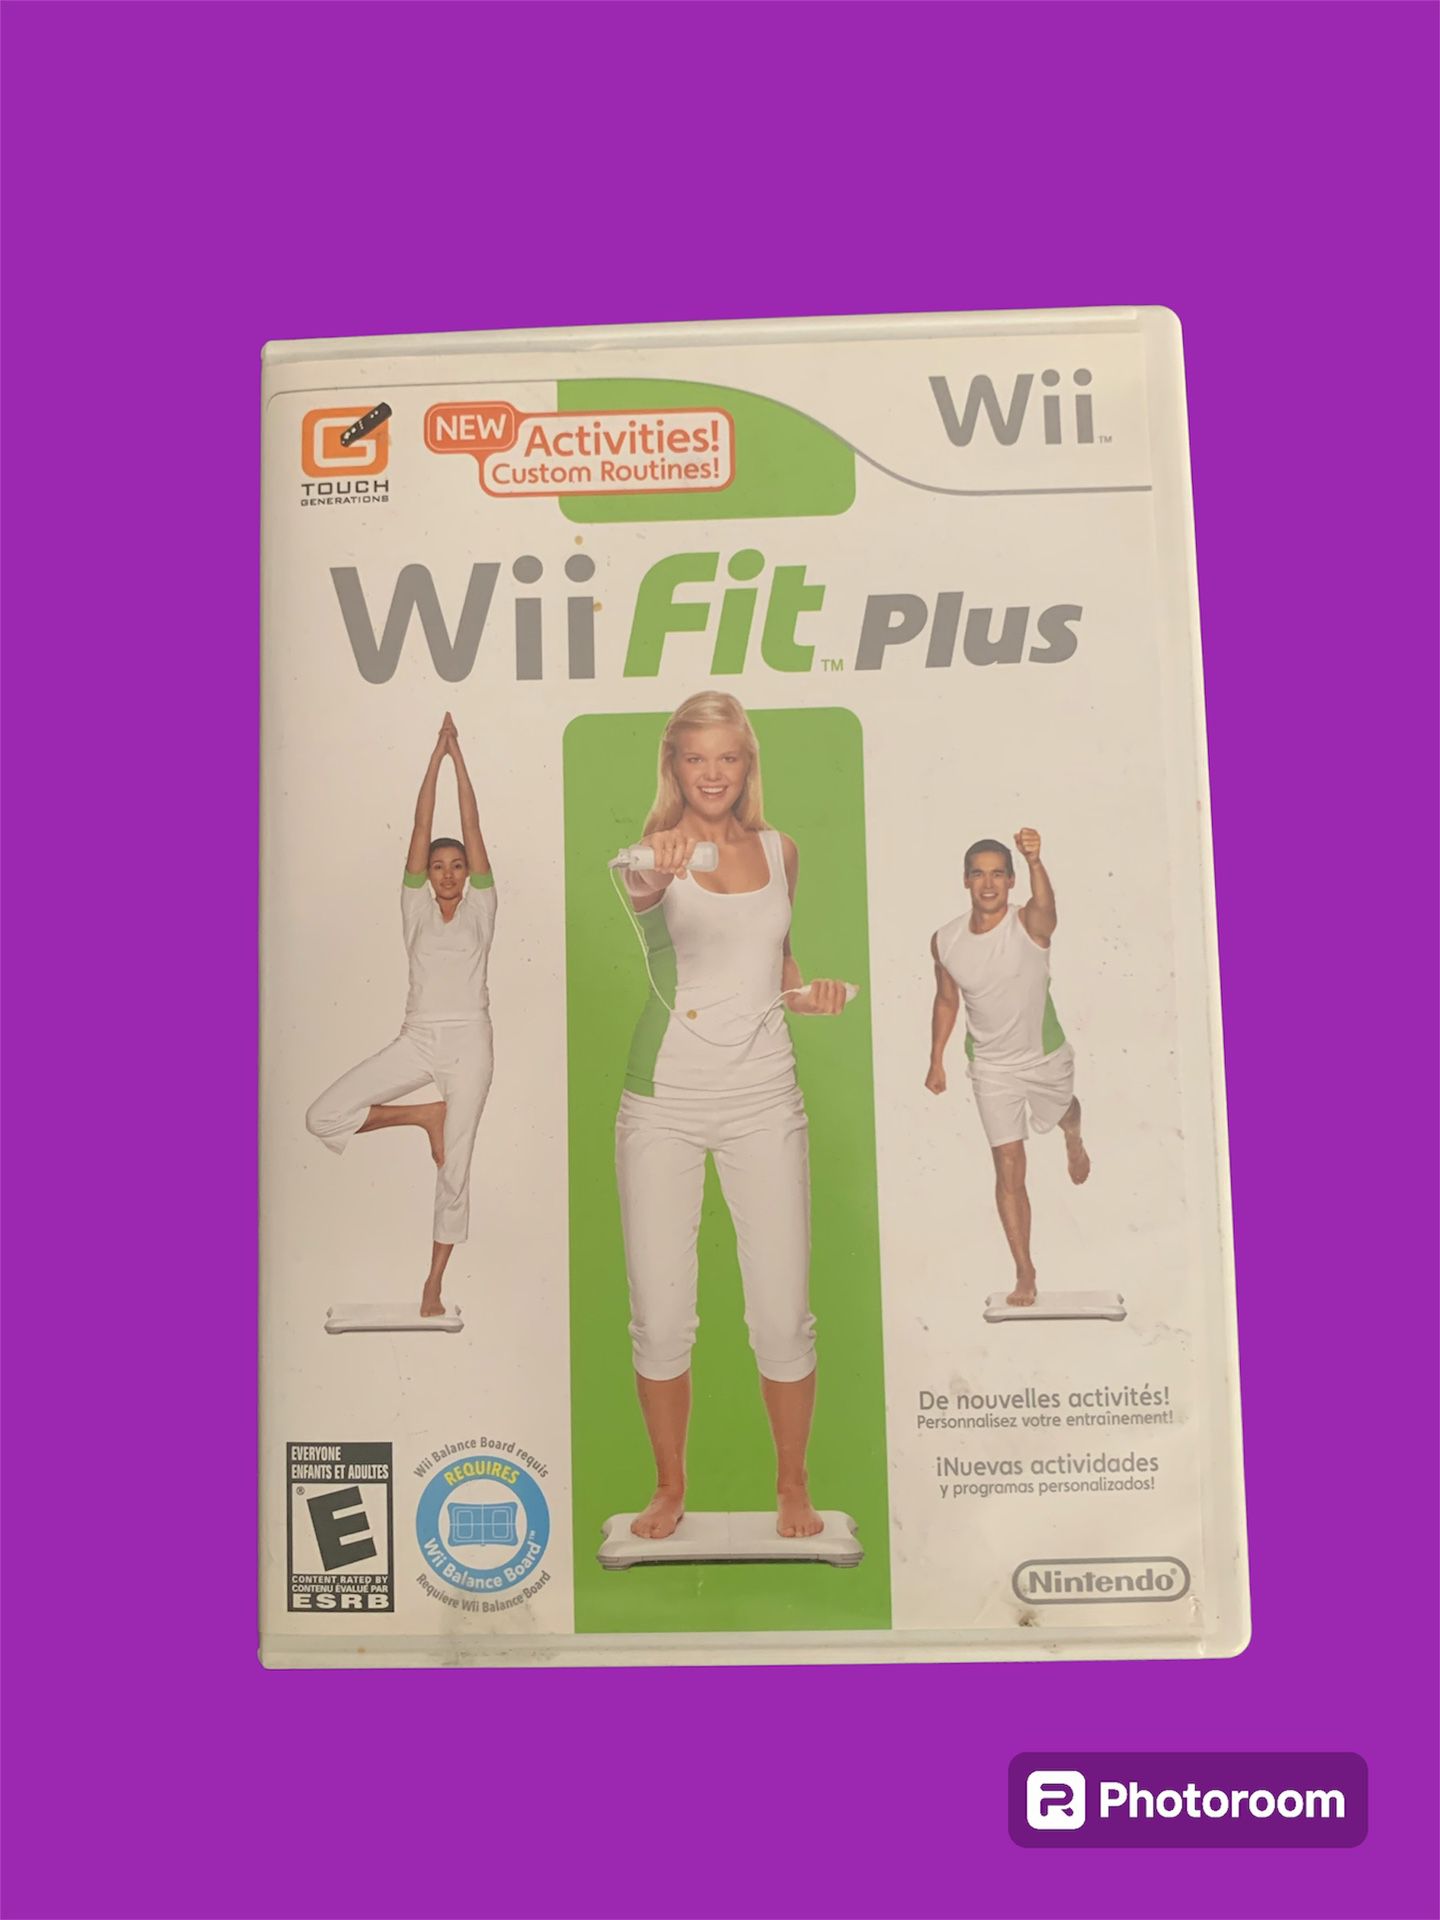 Wii Game Wii Fit Plus Perfect Condition $12